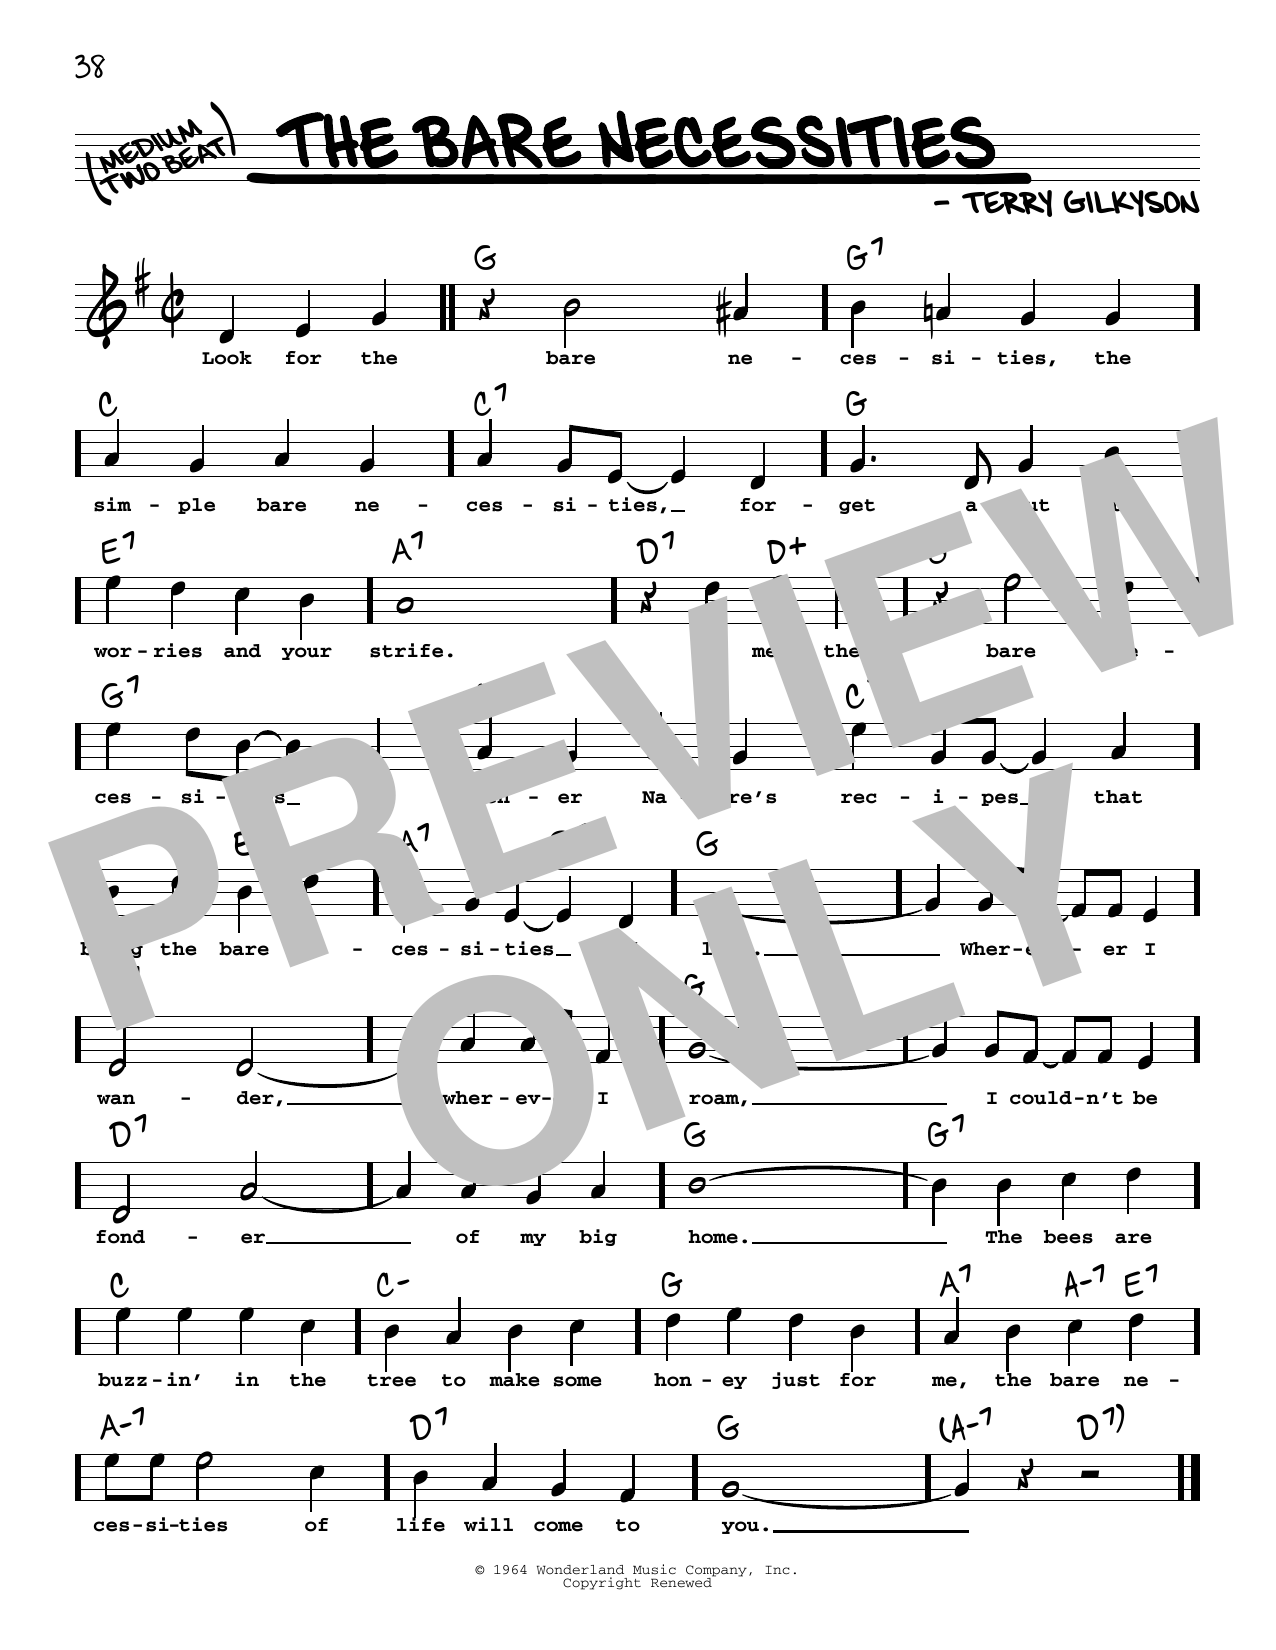 Download Terry Gilkyson The Bare Necessities (High Voice) Sheet Music